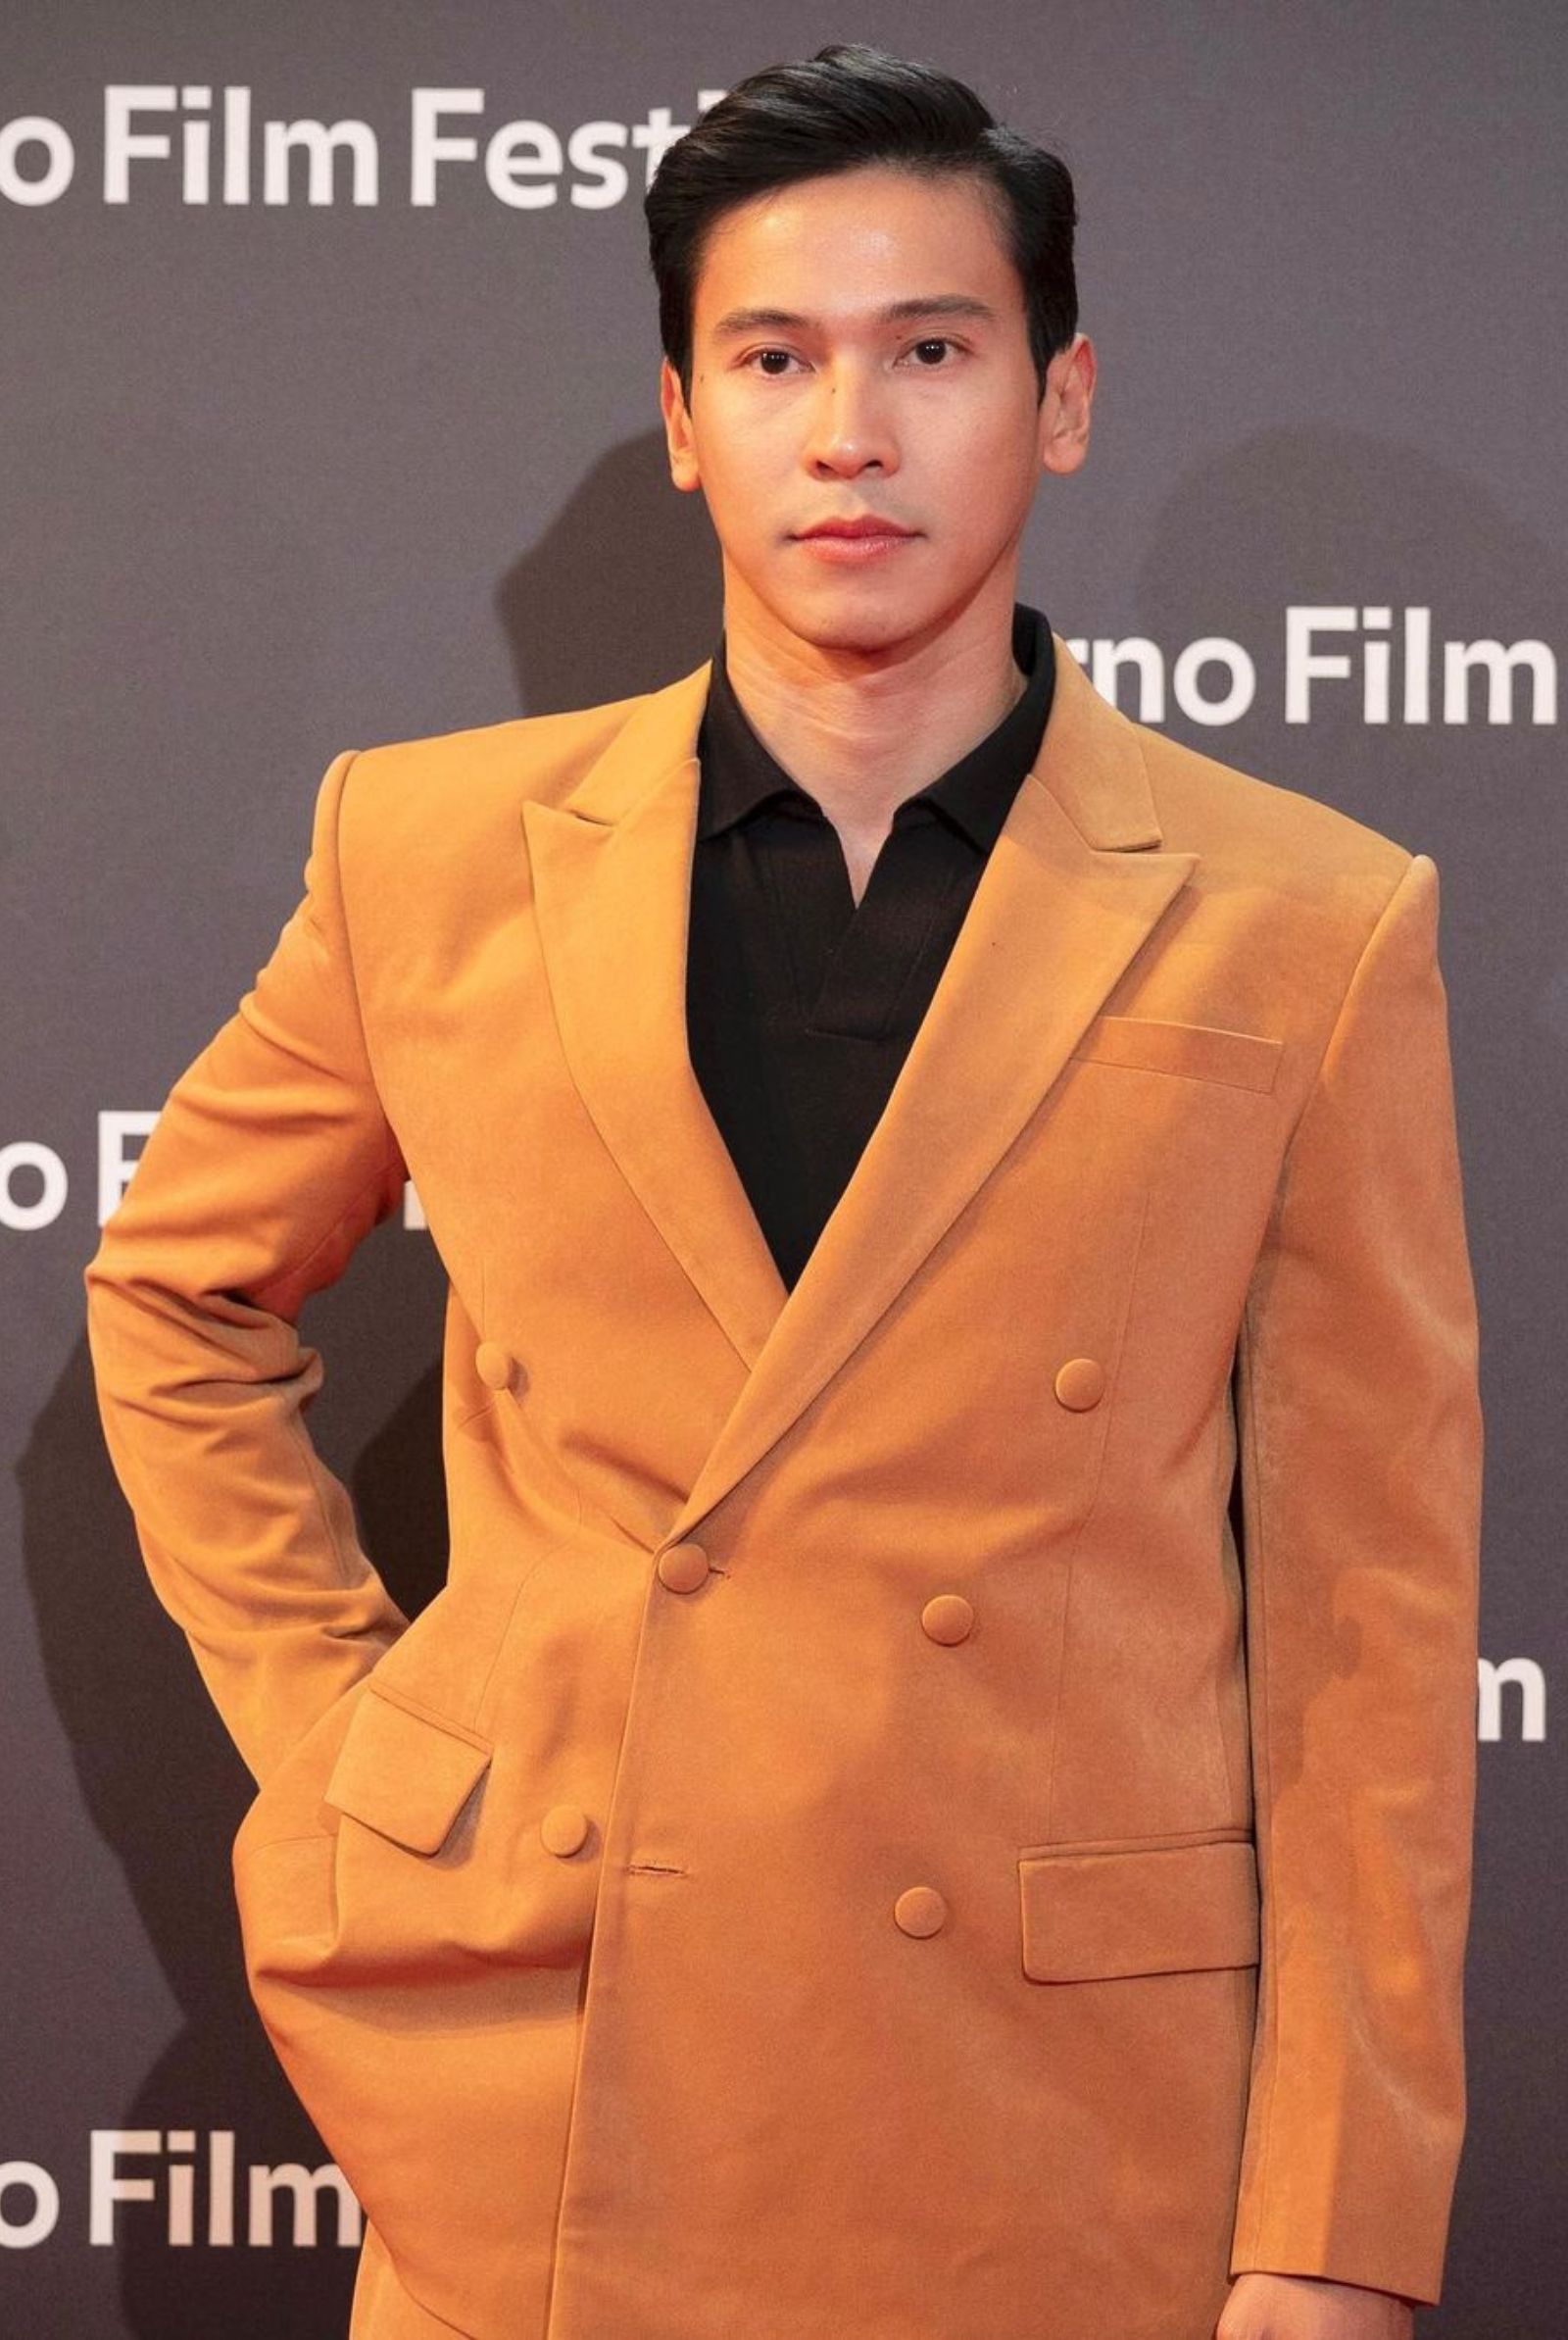 Enchong paints the town golden in Boom Sason's mustard double-breasted suit